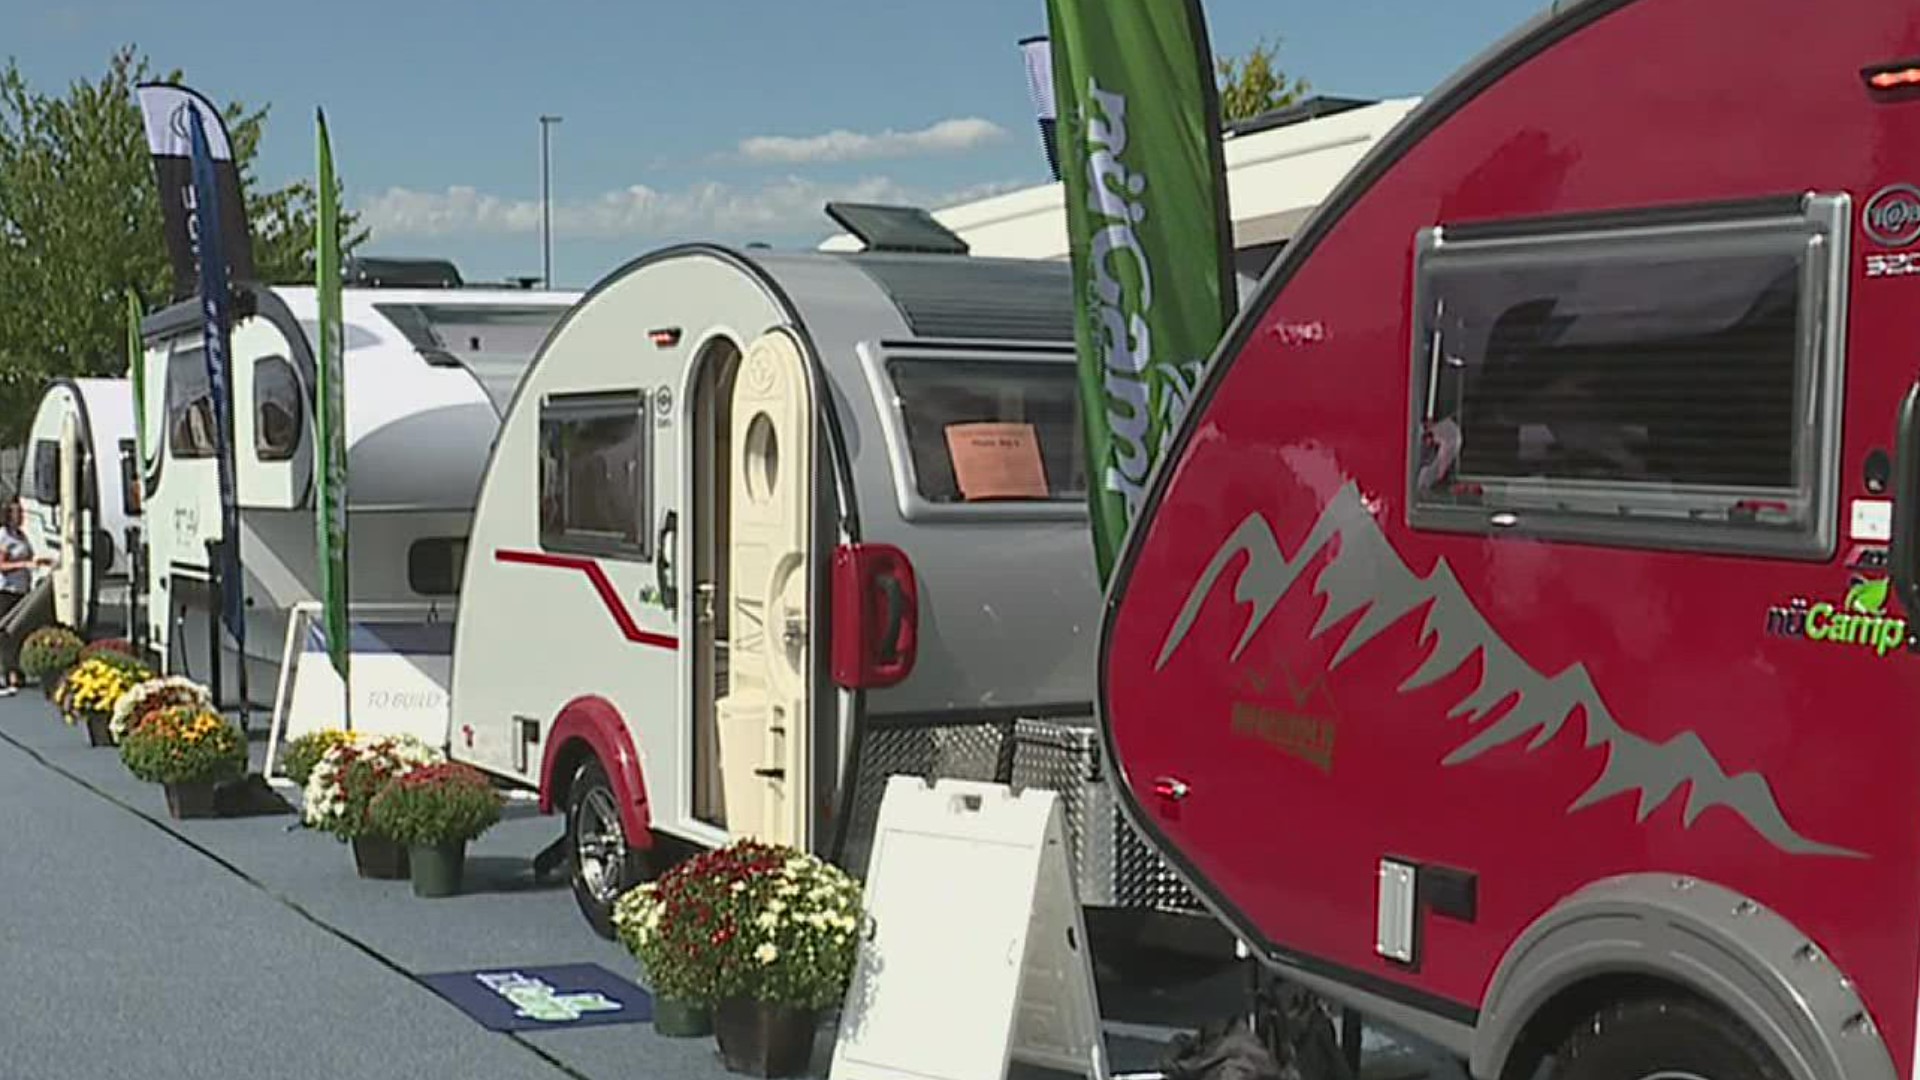 For the first time in three years, the RV giveaway returns with Liberty RV of Gettysburg and Flagstaff giving away a 2023 model camper to one lucky winner.